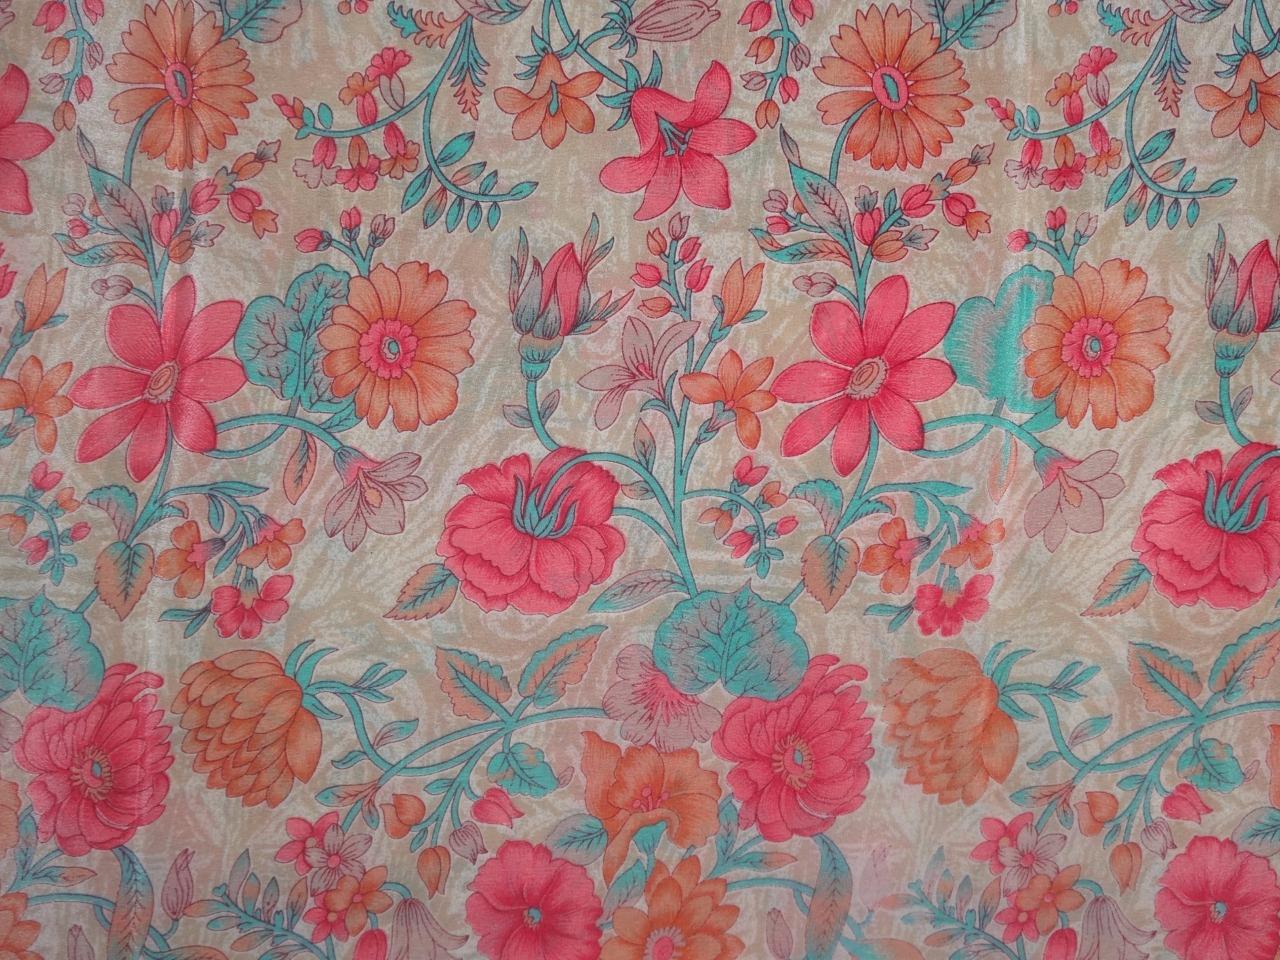 pure silk cdc crepe printed fabric 16 mm weight b2#101/2